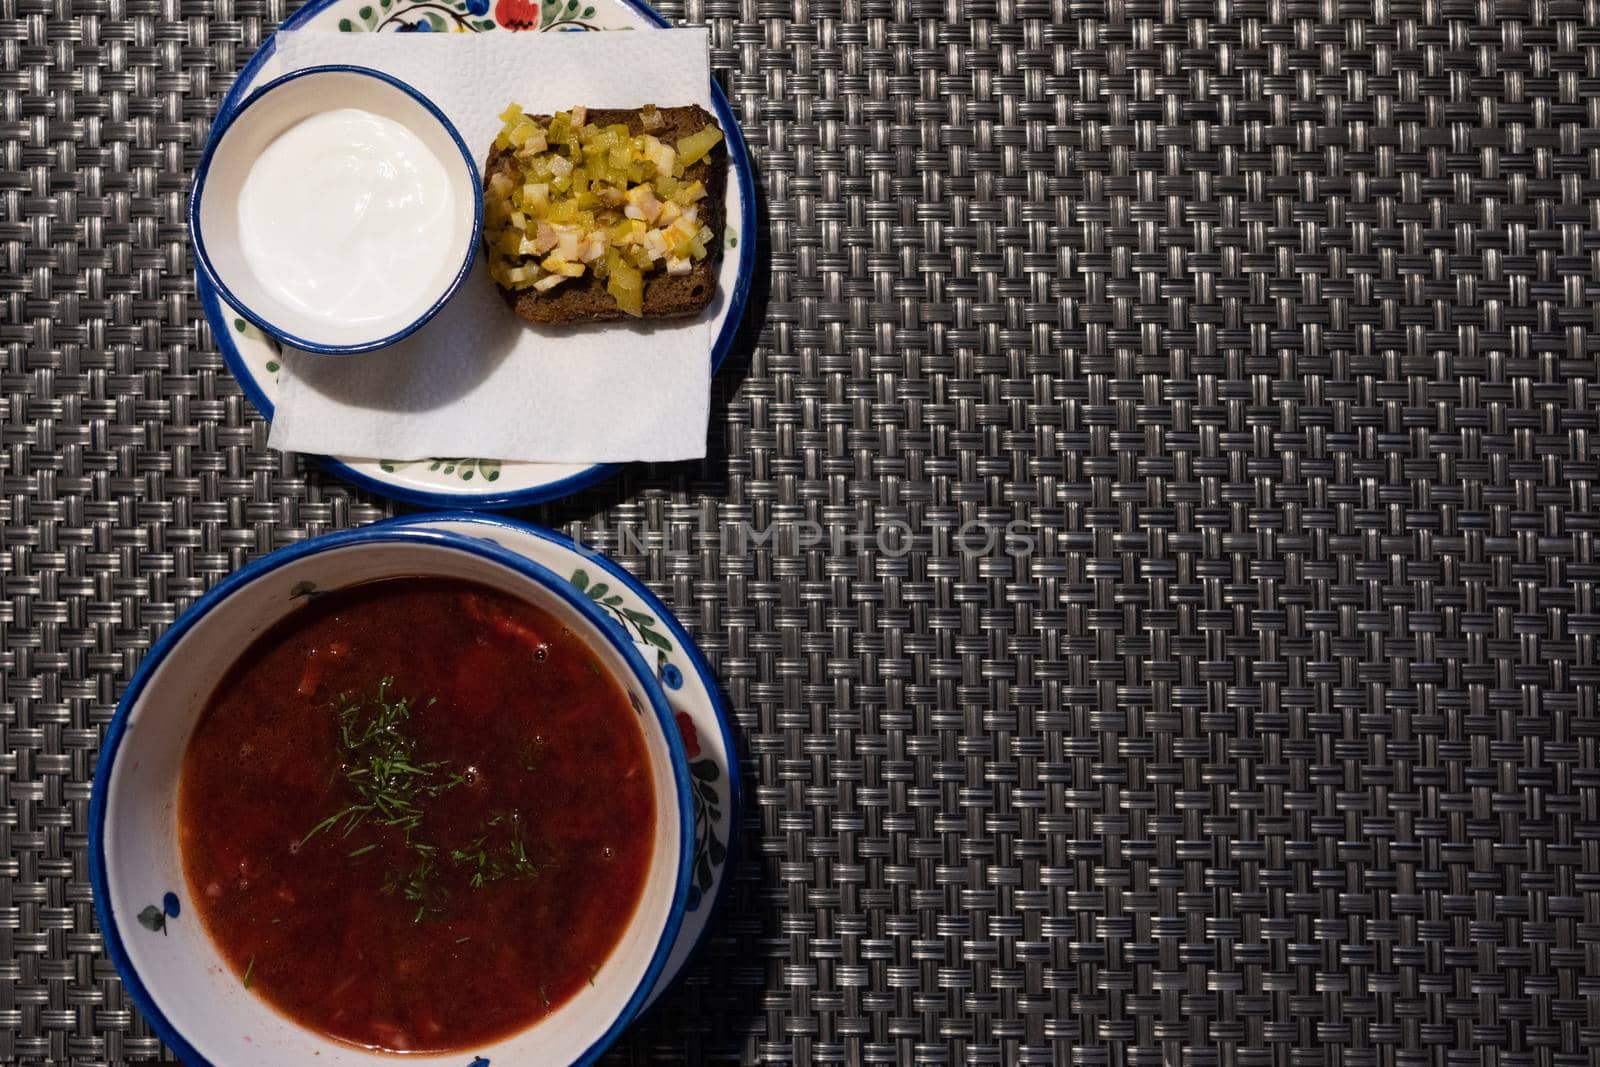 Borscht in a plate is decorated with greens. a cup with sour cream and a sandwich with pickles and bacon for borscht. Plates with napkins decorated with ornaments in a Russian cuisine restaurant.....